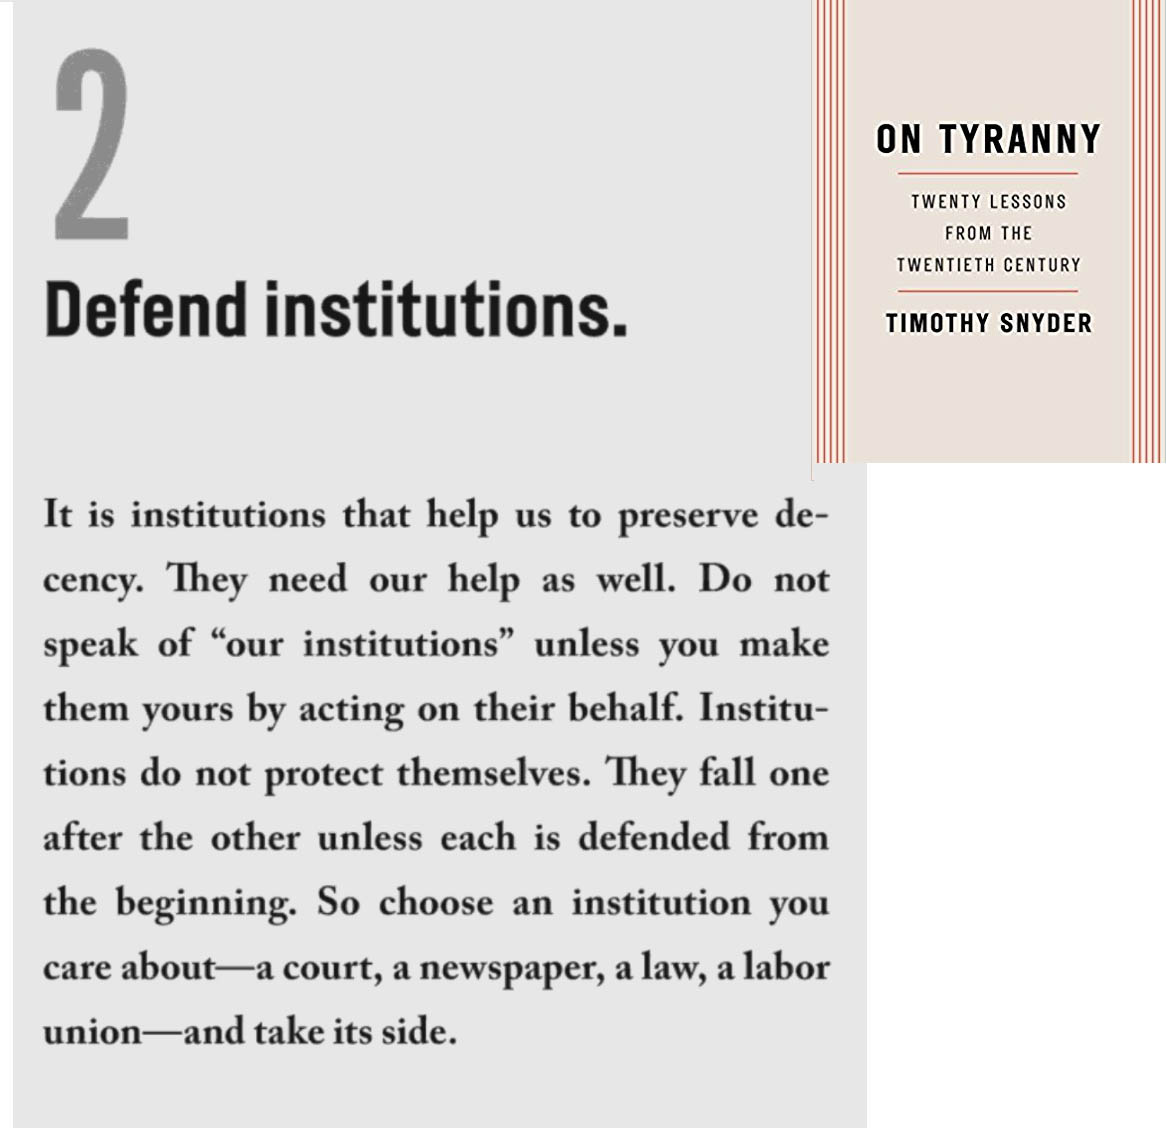 10/ Many of our institutions are teetering on the brink. The more damage done now, the longer they will take to rebuildSo we have to do everything we can to preserve them.That's why "Defend Institutions" is #2 on Timothy Snyder’s list for how to fight against tyranny